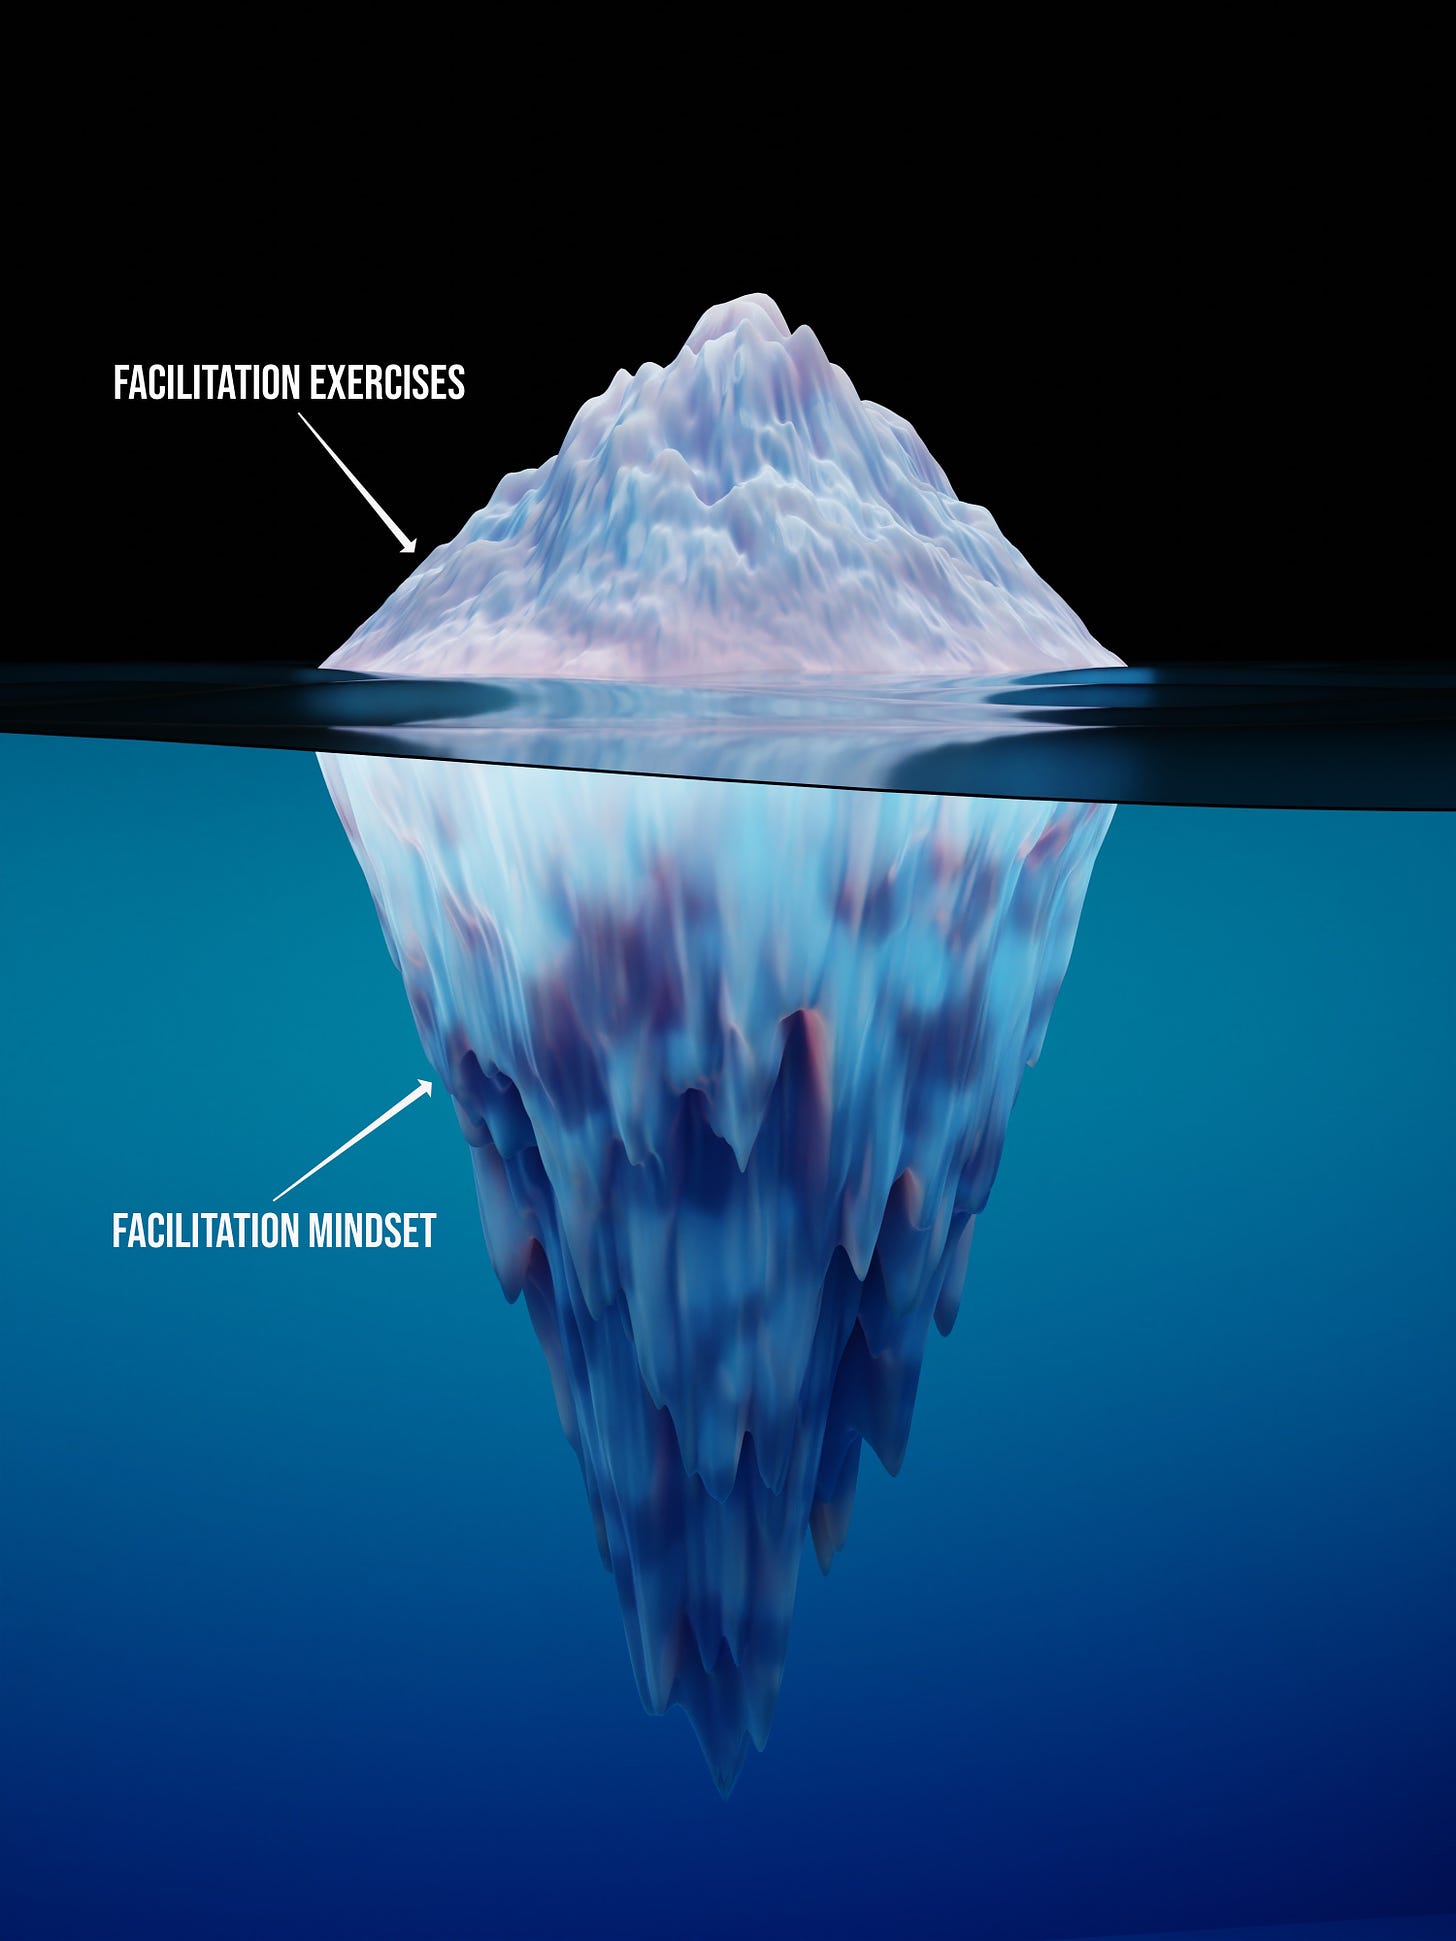 Image of iceberg with tip labelled "facilitation exercises" and underwater part labelled "facilitation mindset"